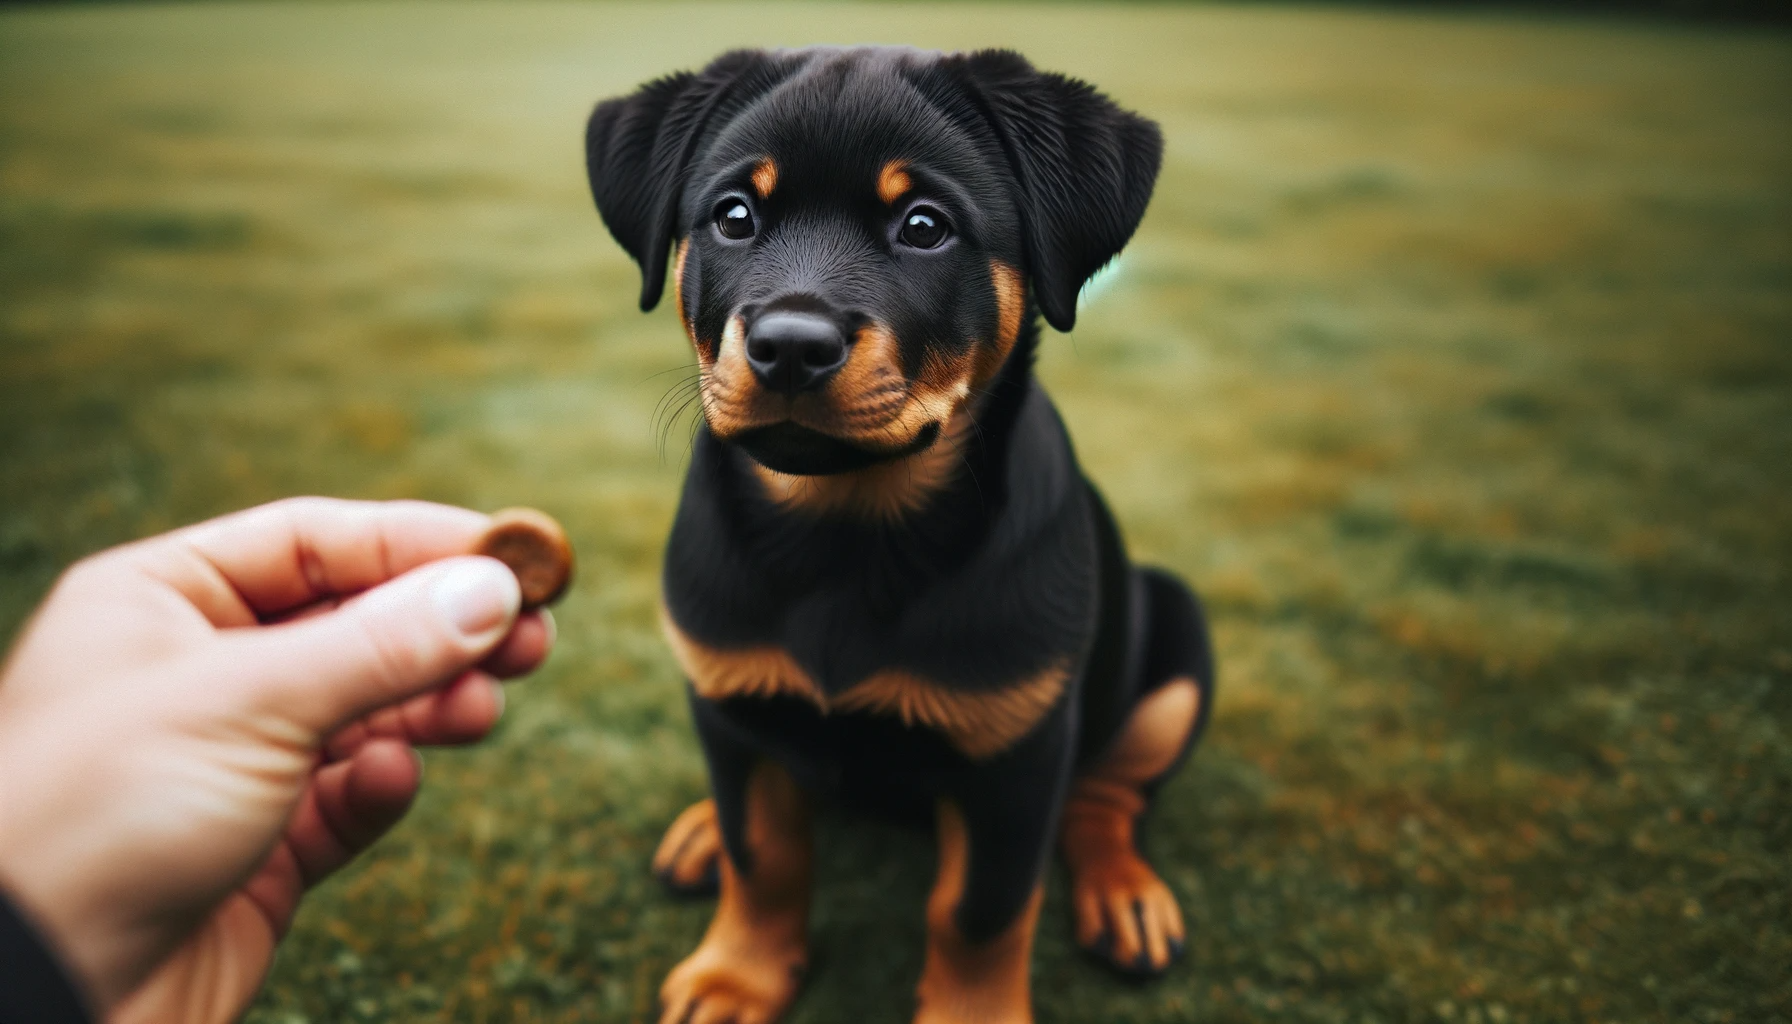 A Rottweiler Lab Mix puppy in a sit position, eagerly awaiting a treat reward, showing that consistency and positive reinforcement are effective